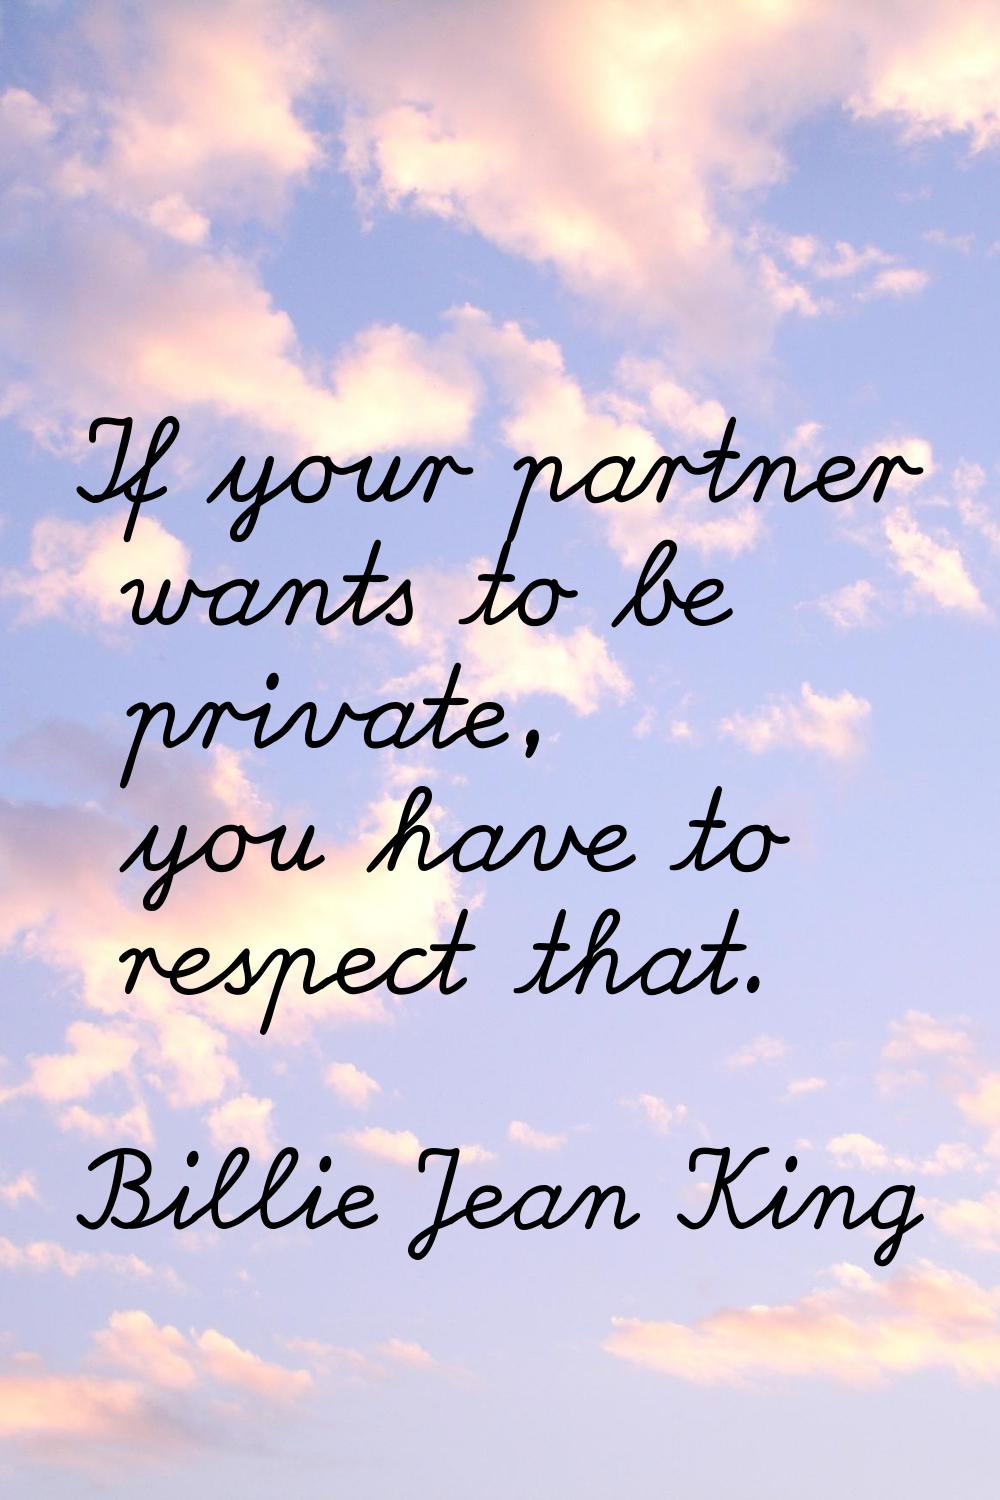 If your partner wants to be private, you have to respect that.